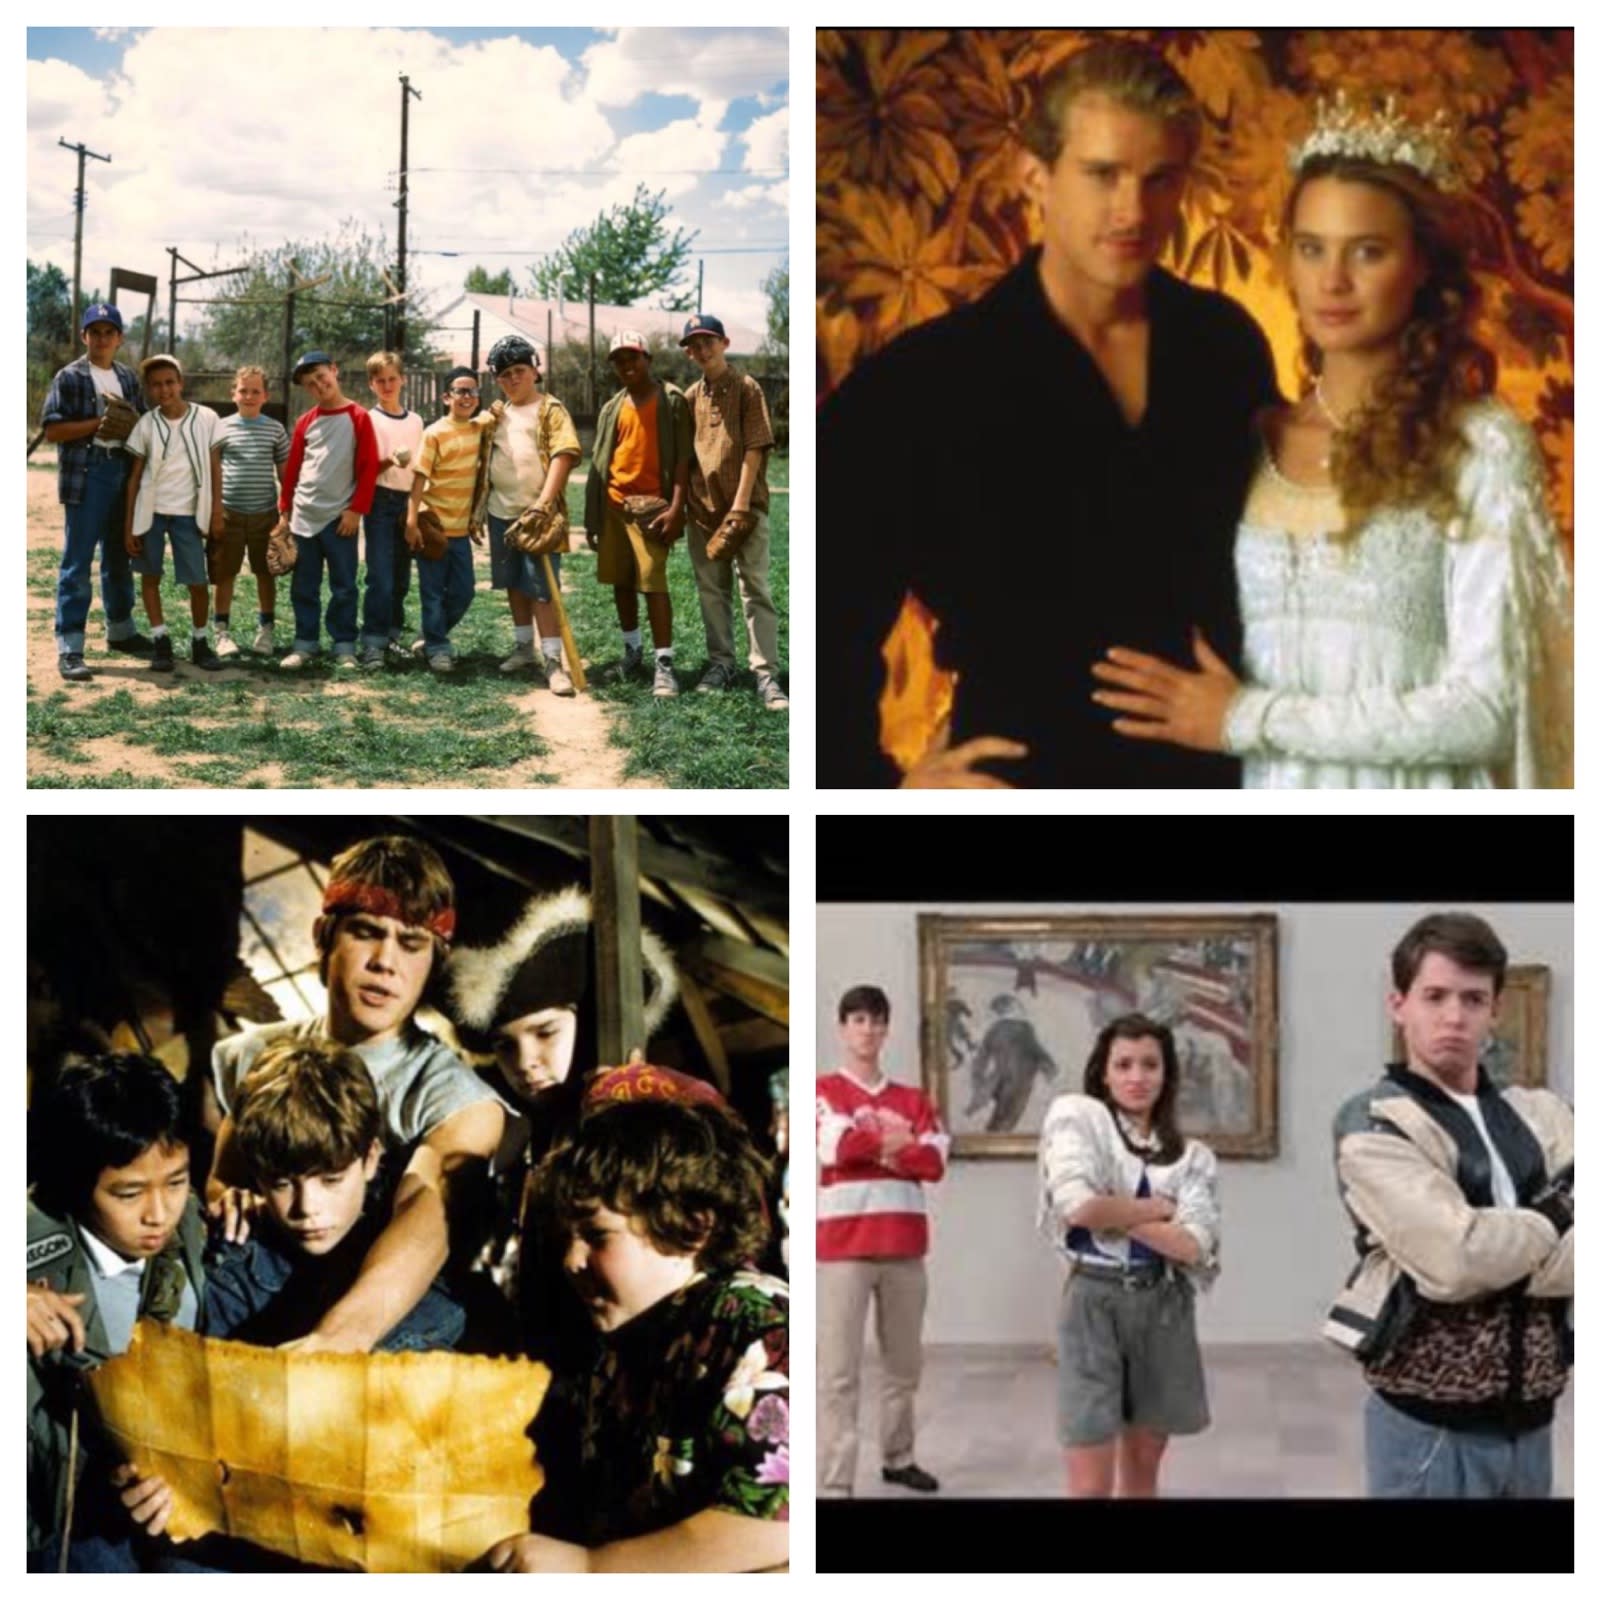 Sandlot, Princess Bride, The Goonies and Ferris Bueller's Day Off will all be shown at the Living Fort Wayne Film Series!